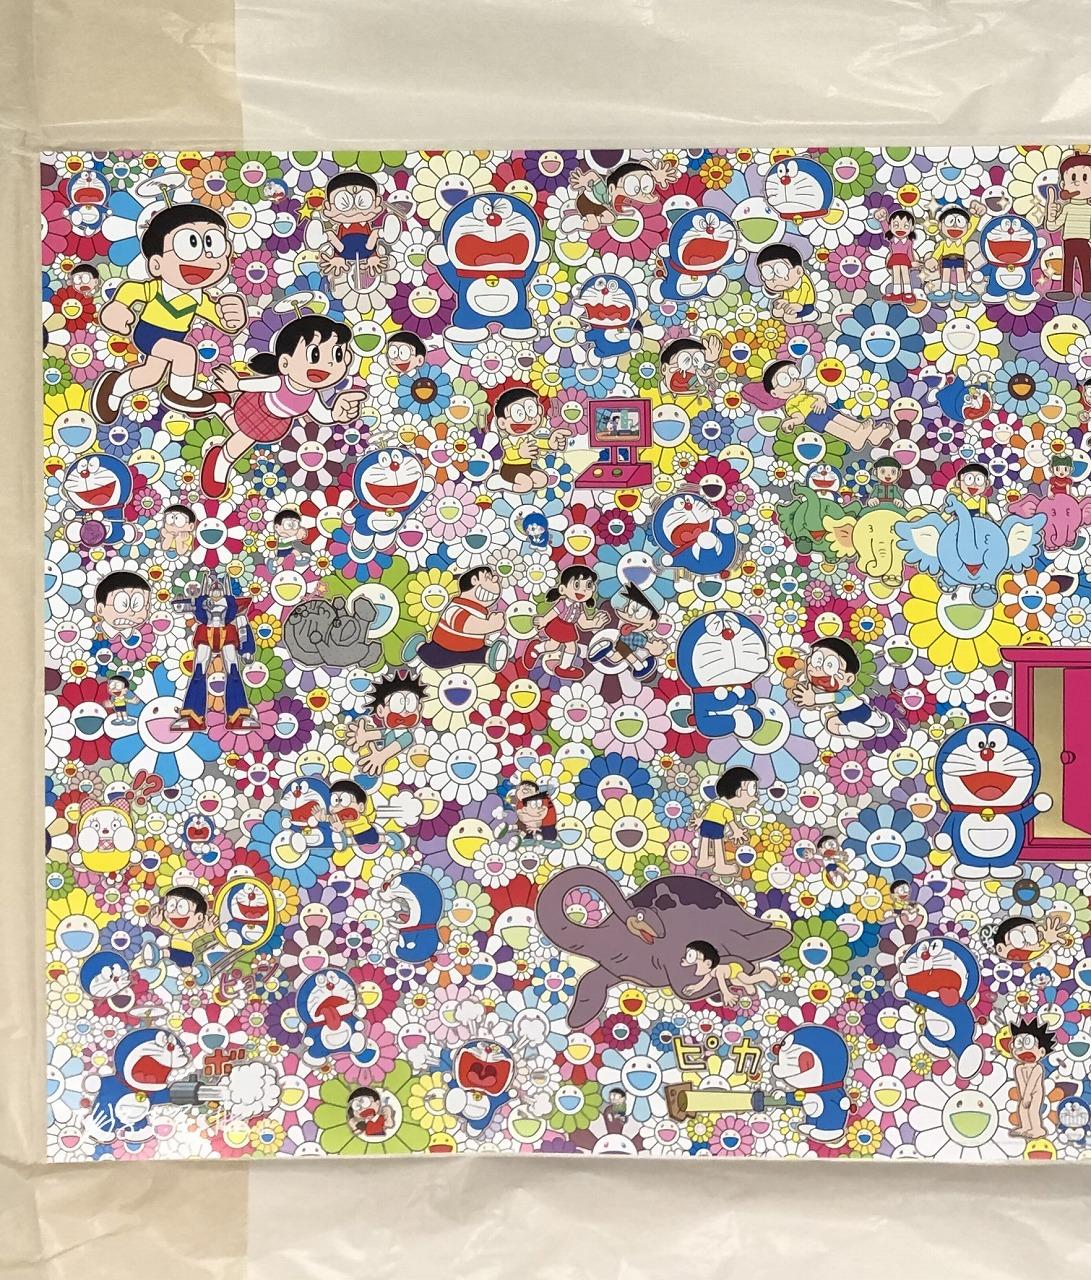 Wouldn't it be nice... Limited Edition (print) by Murakami signed and numbered - Gray Figurative Print by Takashi Murakami